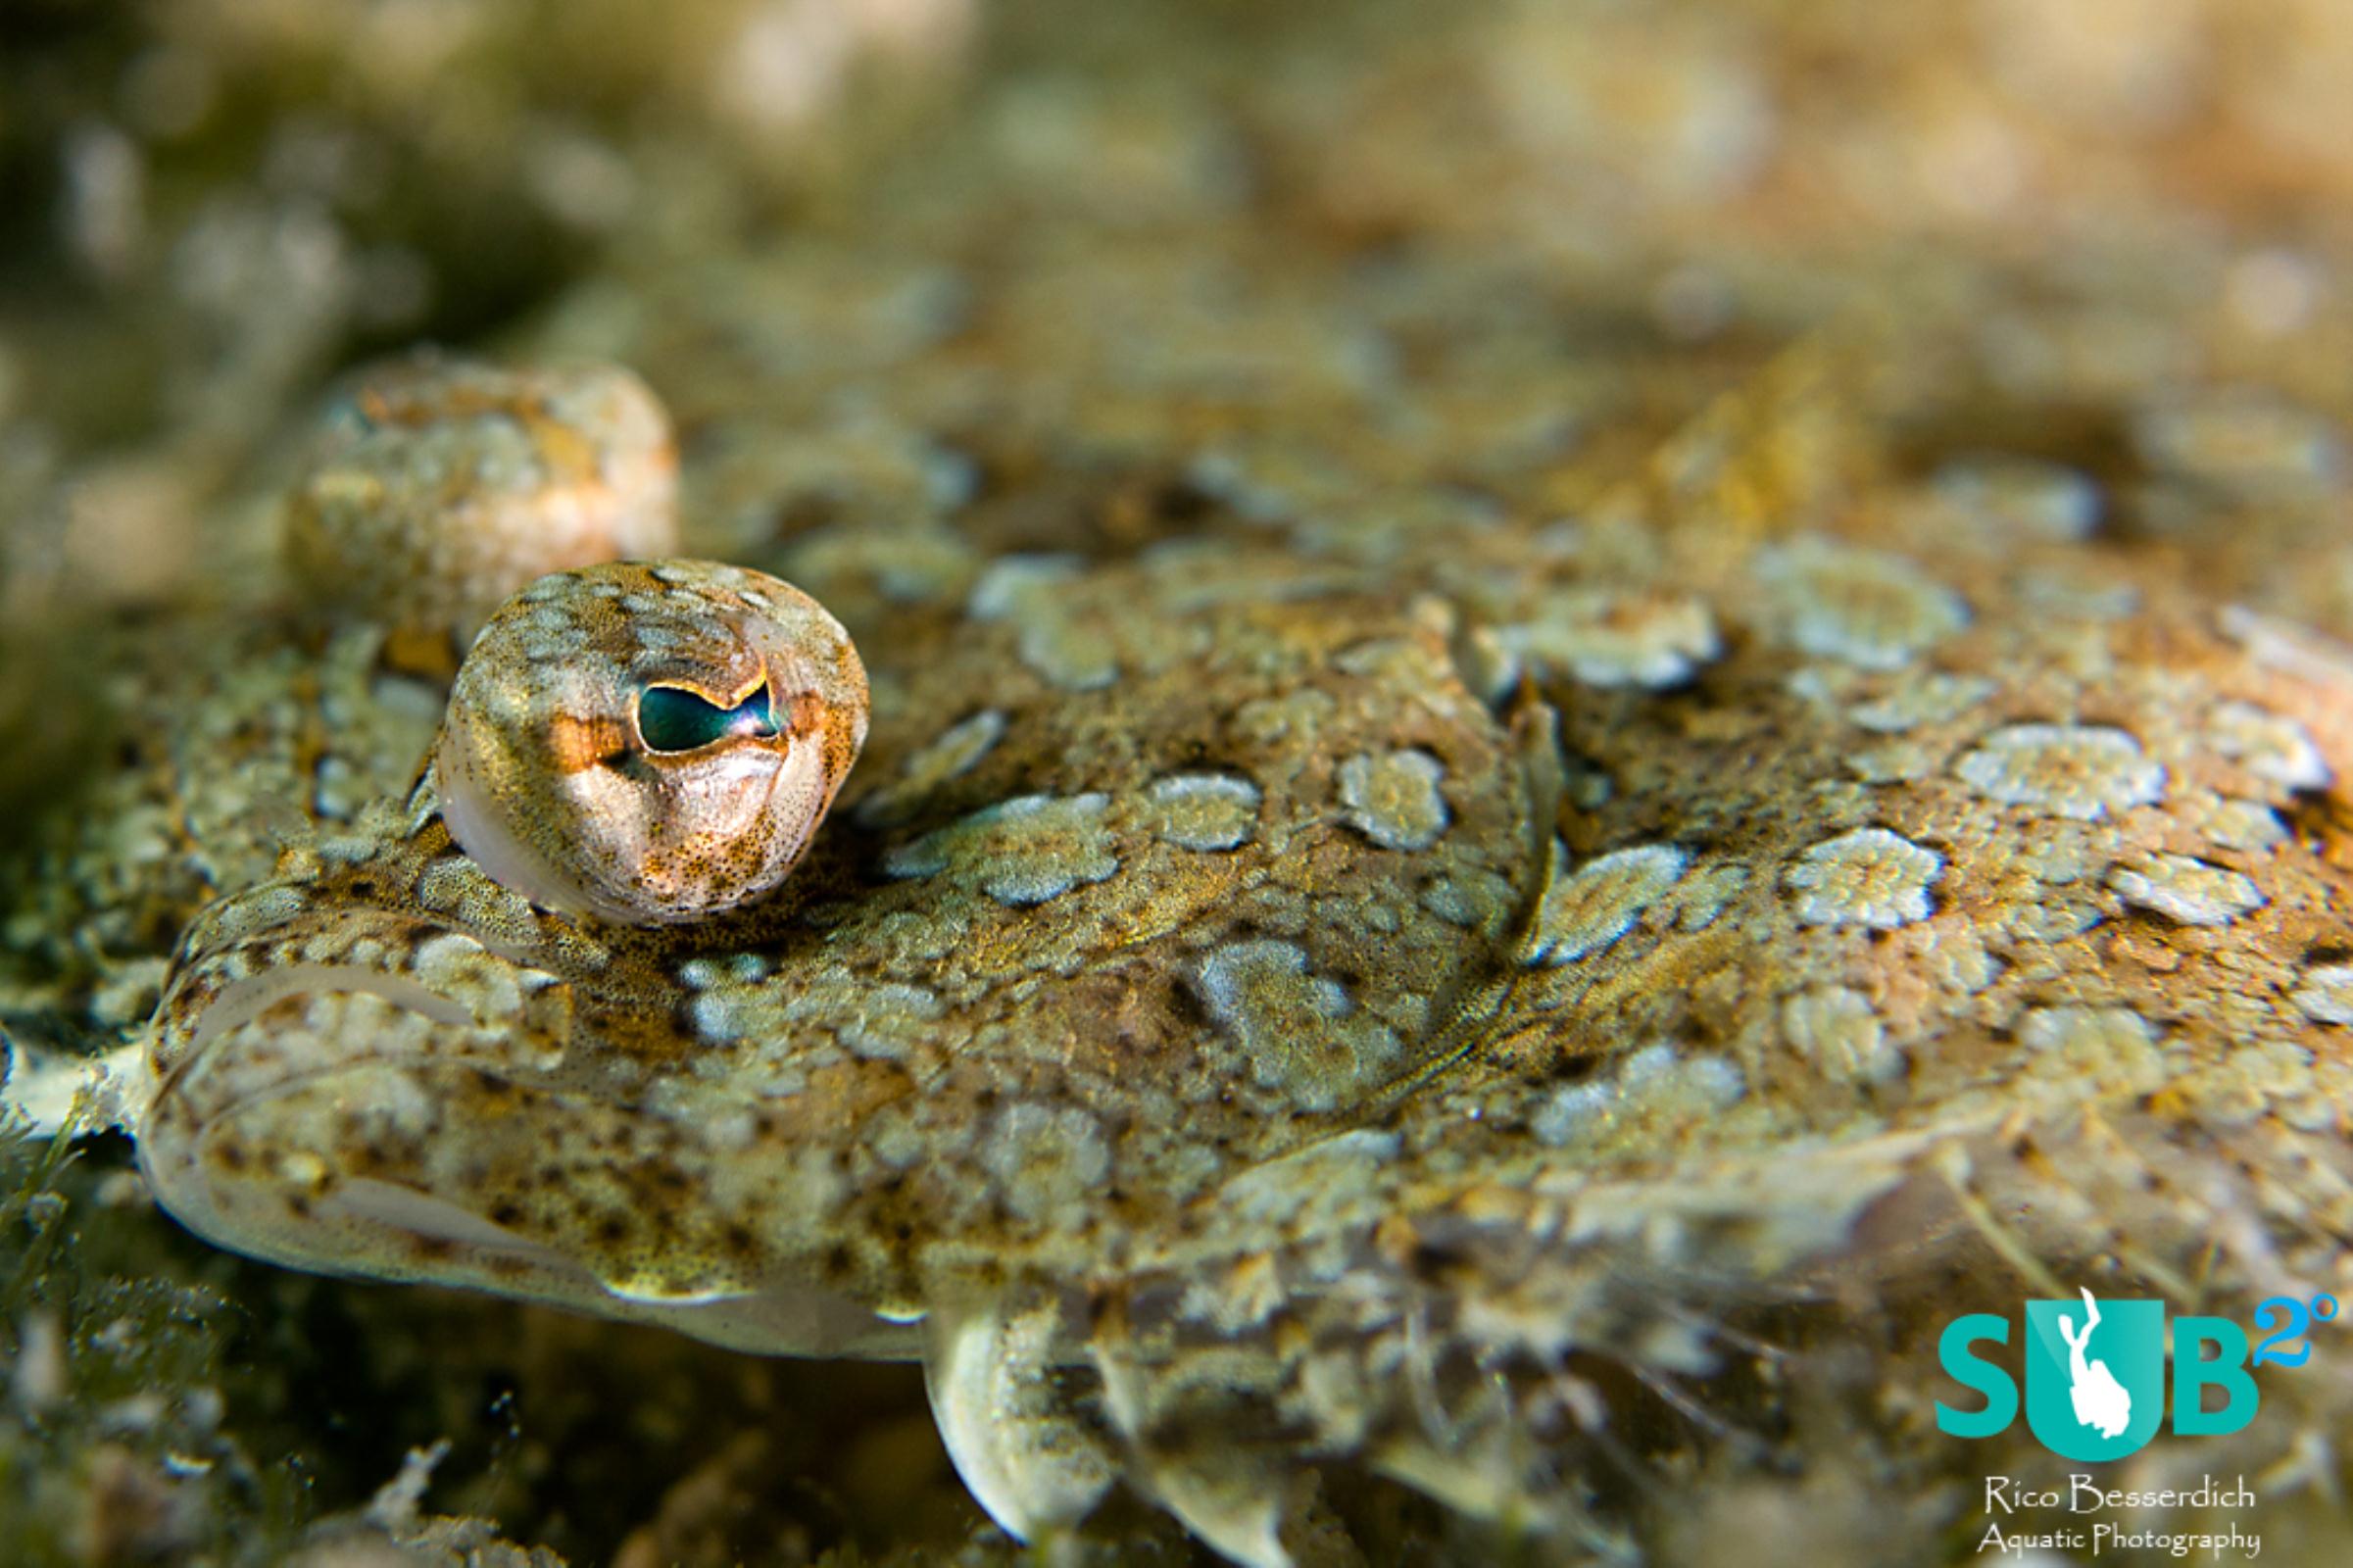 Marine animals that trust their own camouflage are ( once we've spot them ) easy to approach.